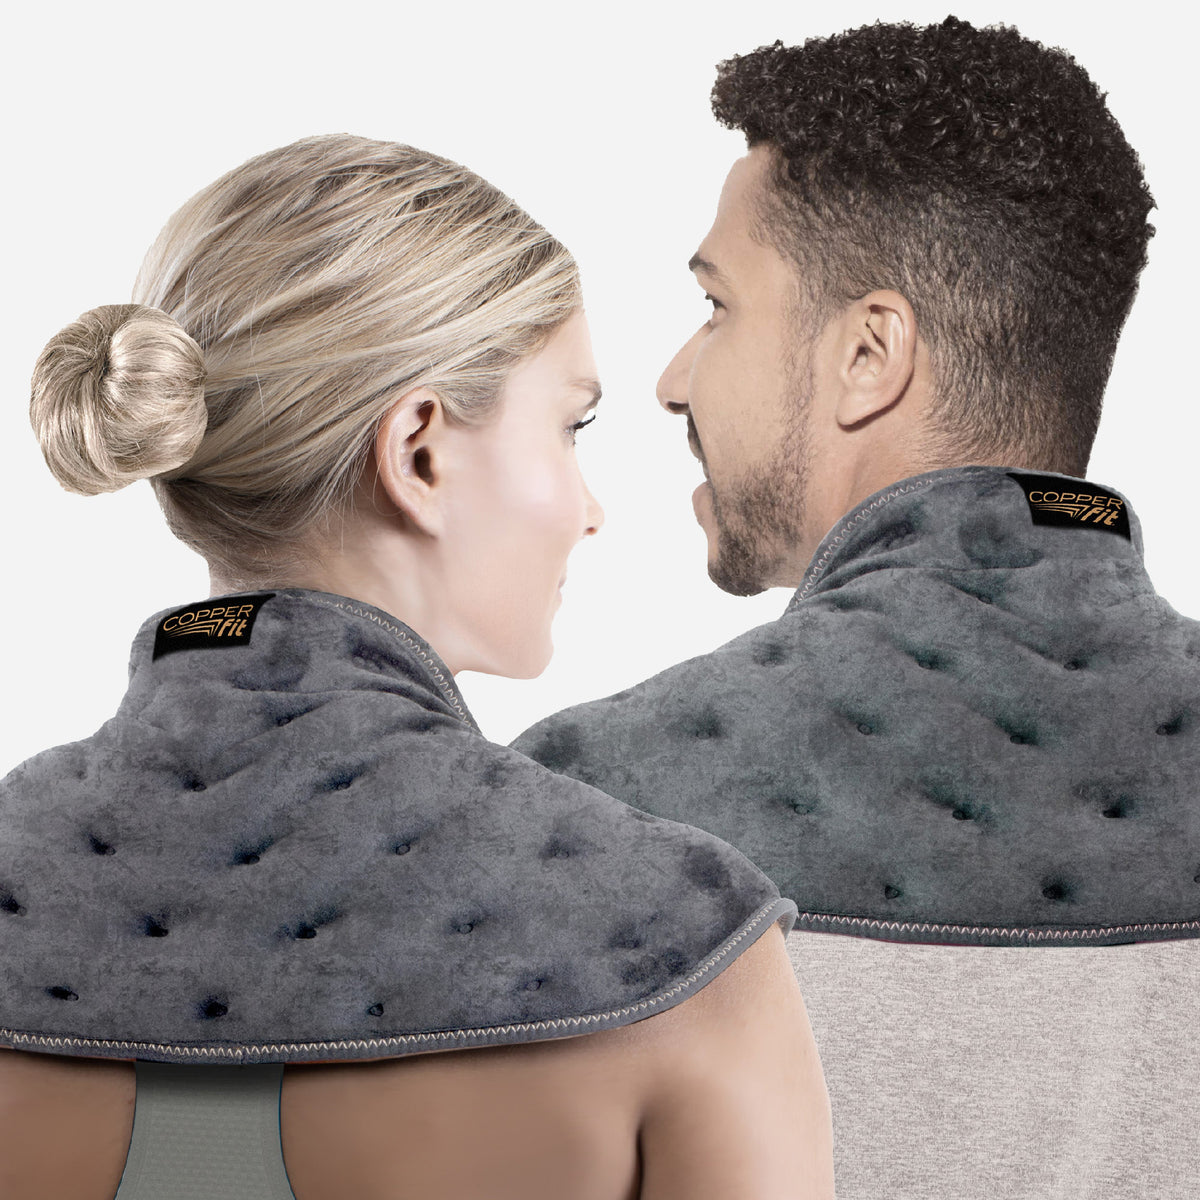 Heated Shoulder Brace Wrap with Massage, Shoulder Heating Pad with